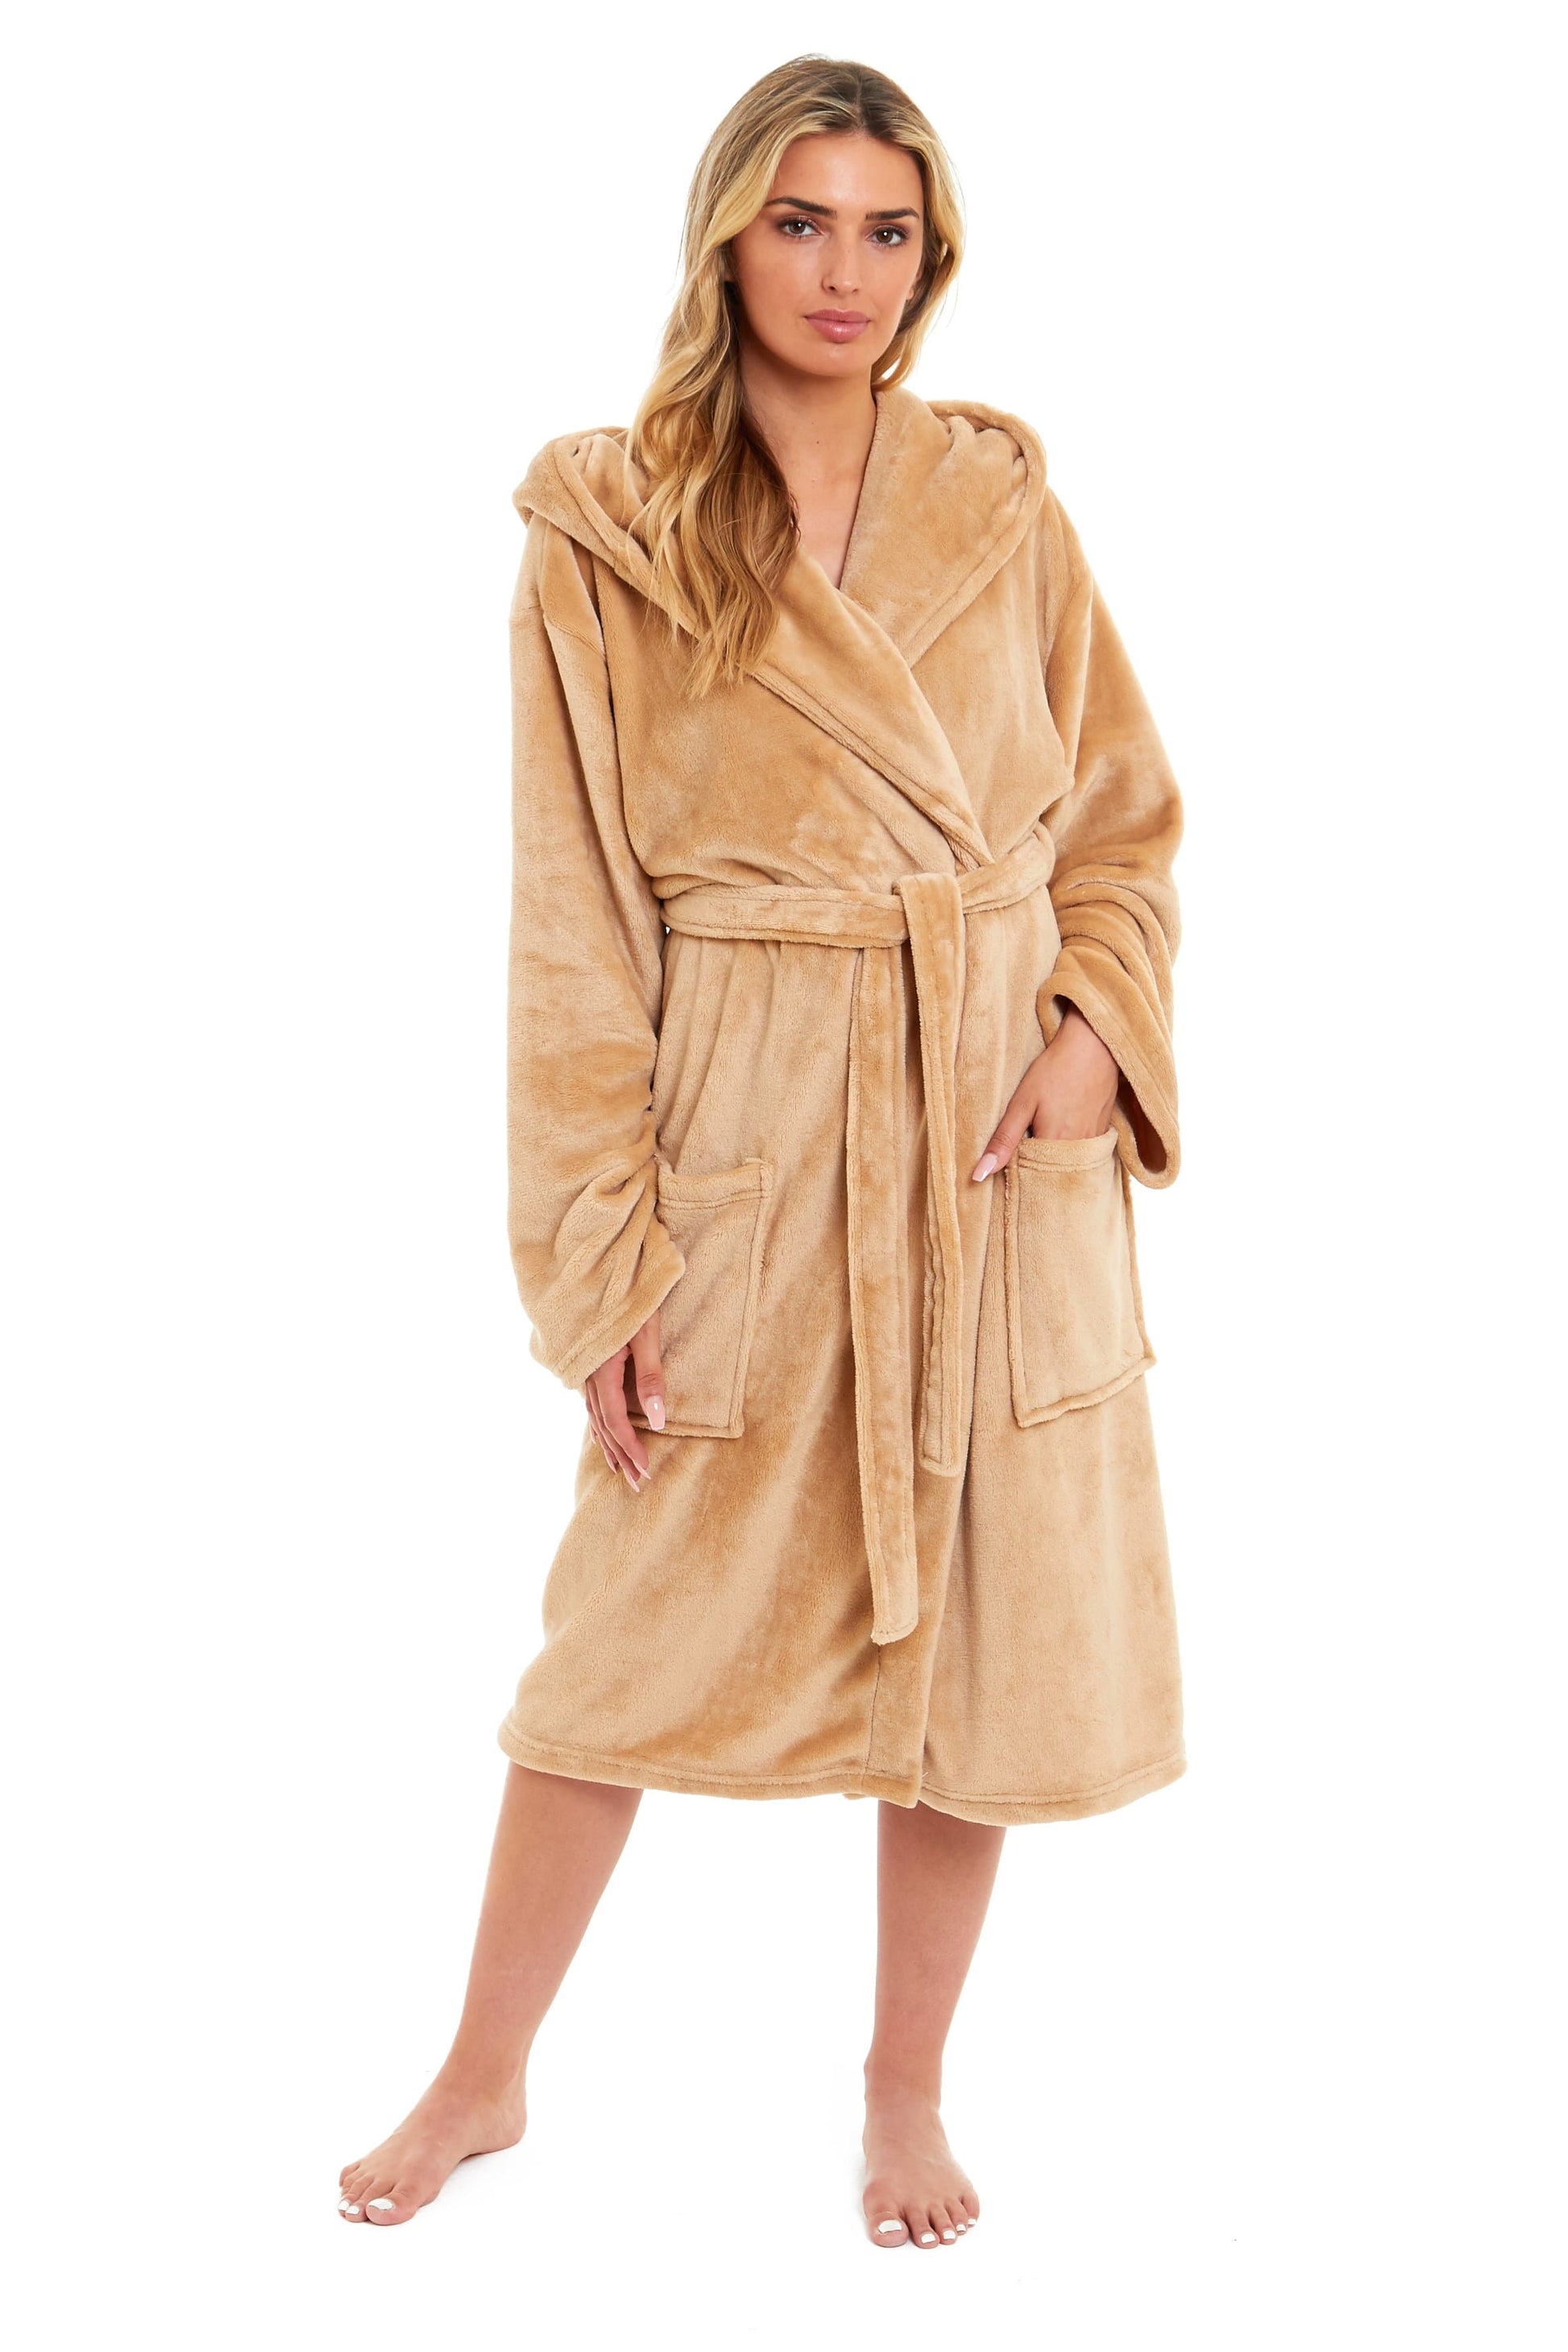 Luxe Cosy Cream Ultra Soft Fleece Dressing Gown Robe